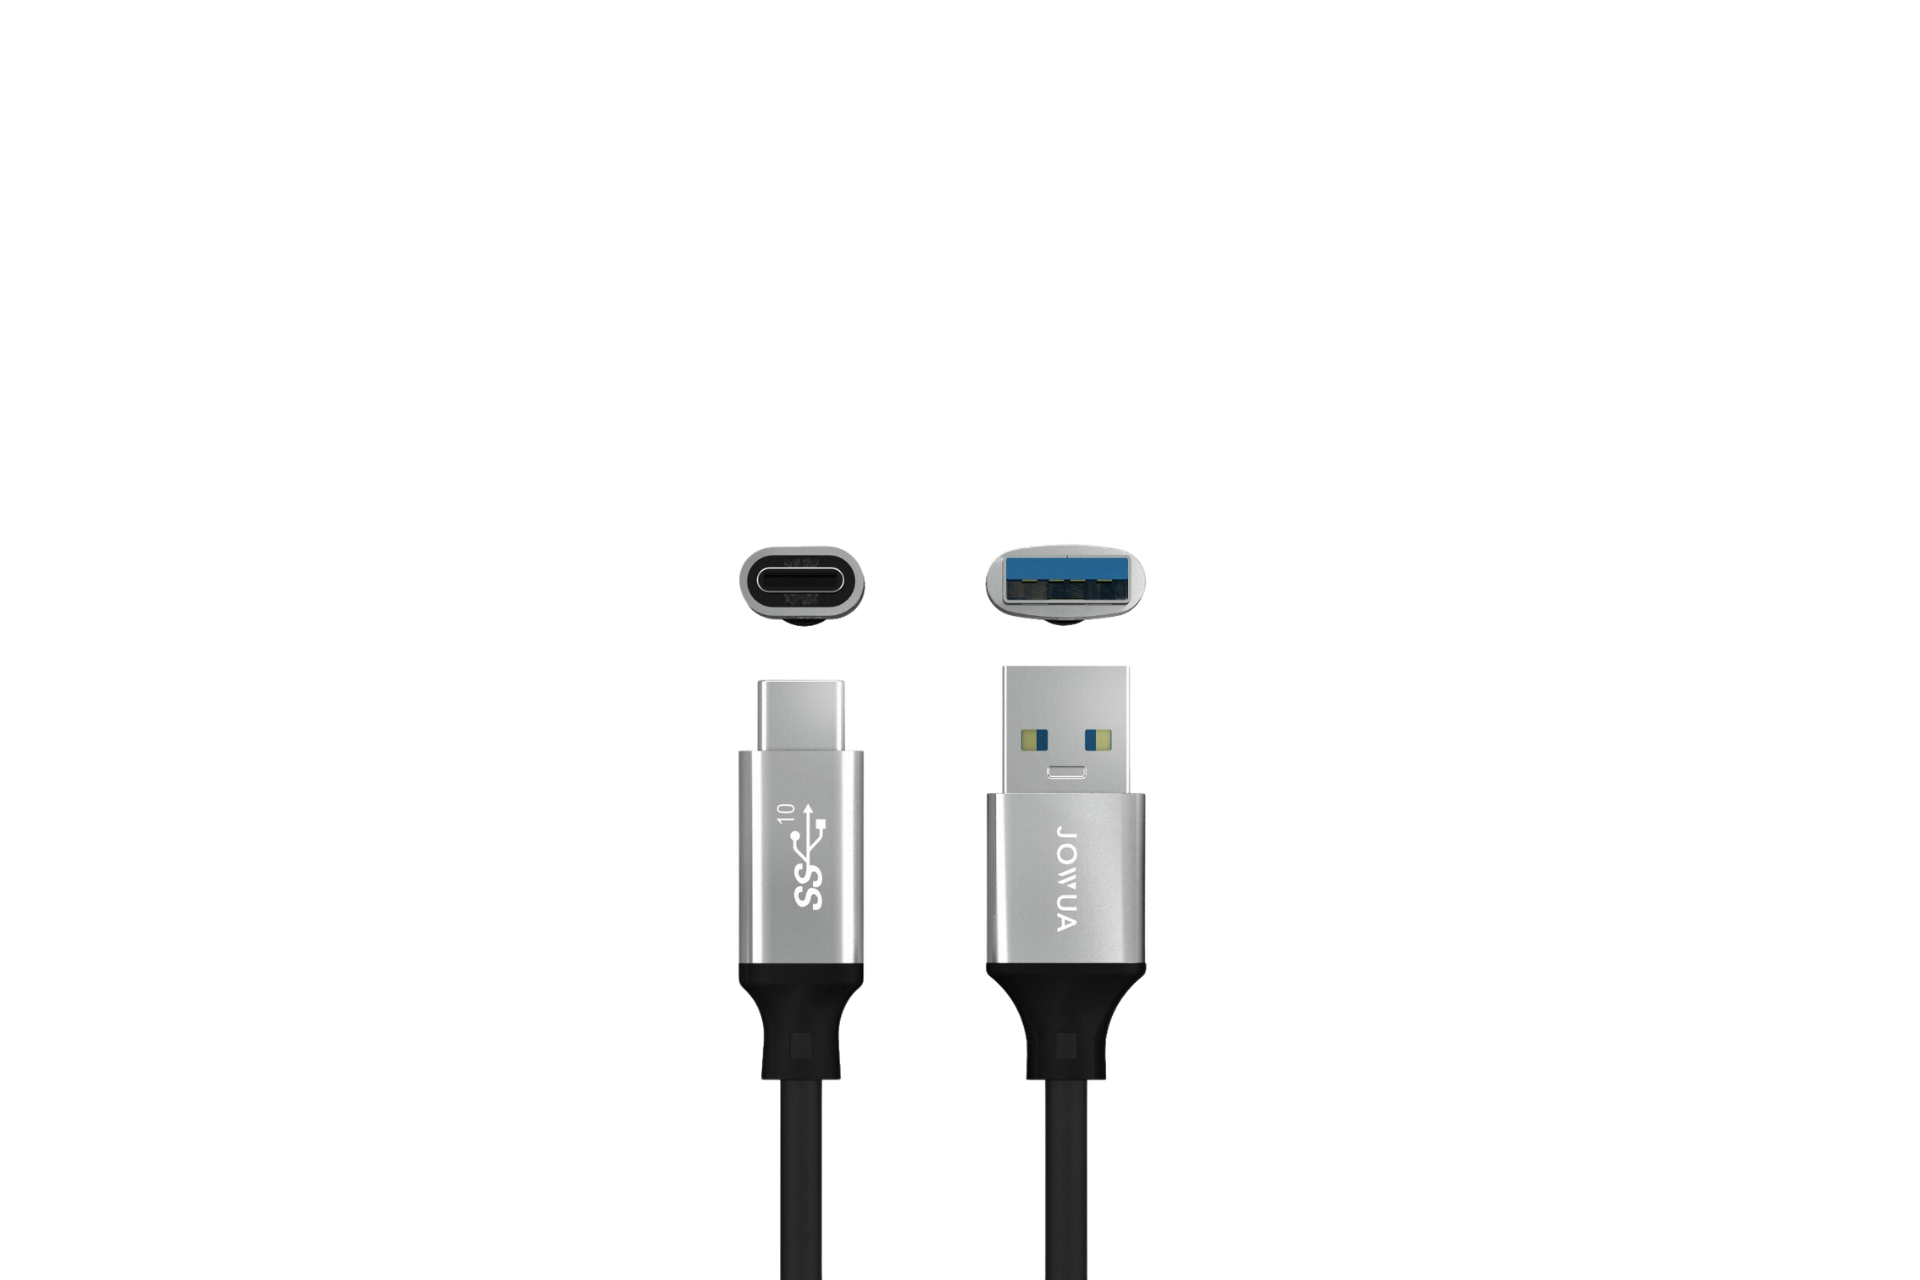 USB C to USB A for SSD jowua